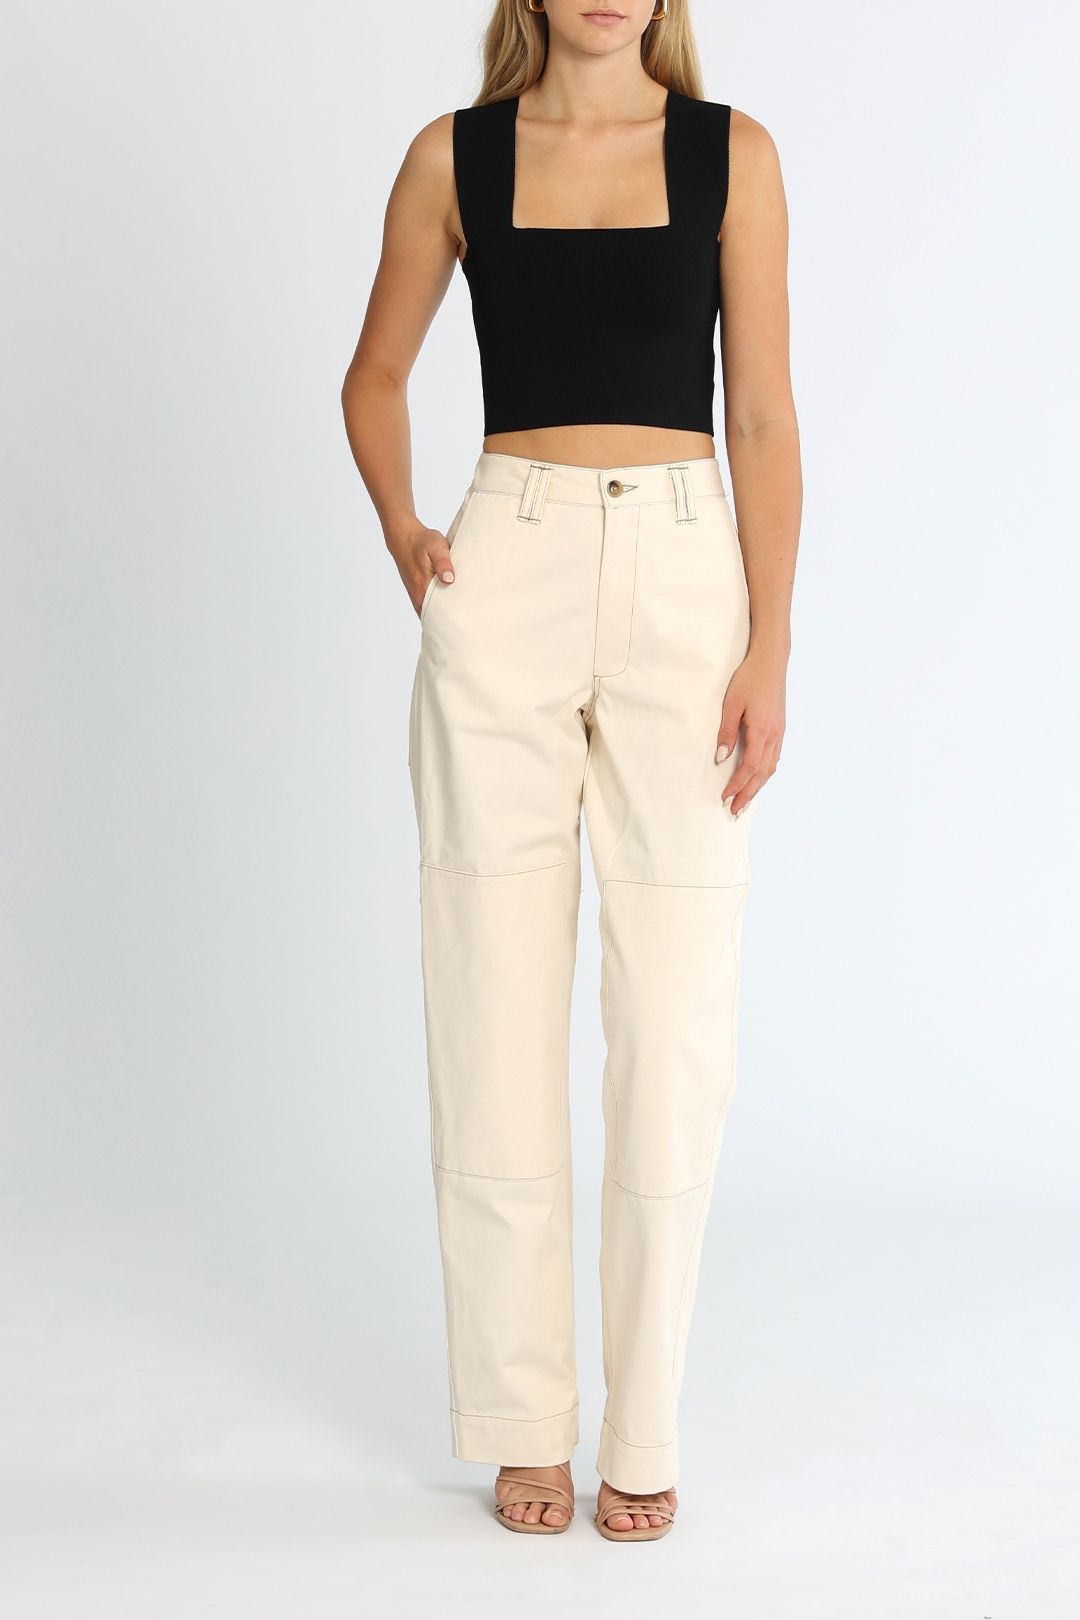 Women's Daily Twill Pant made with Organic Cotton